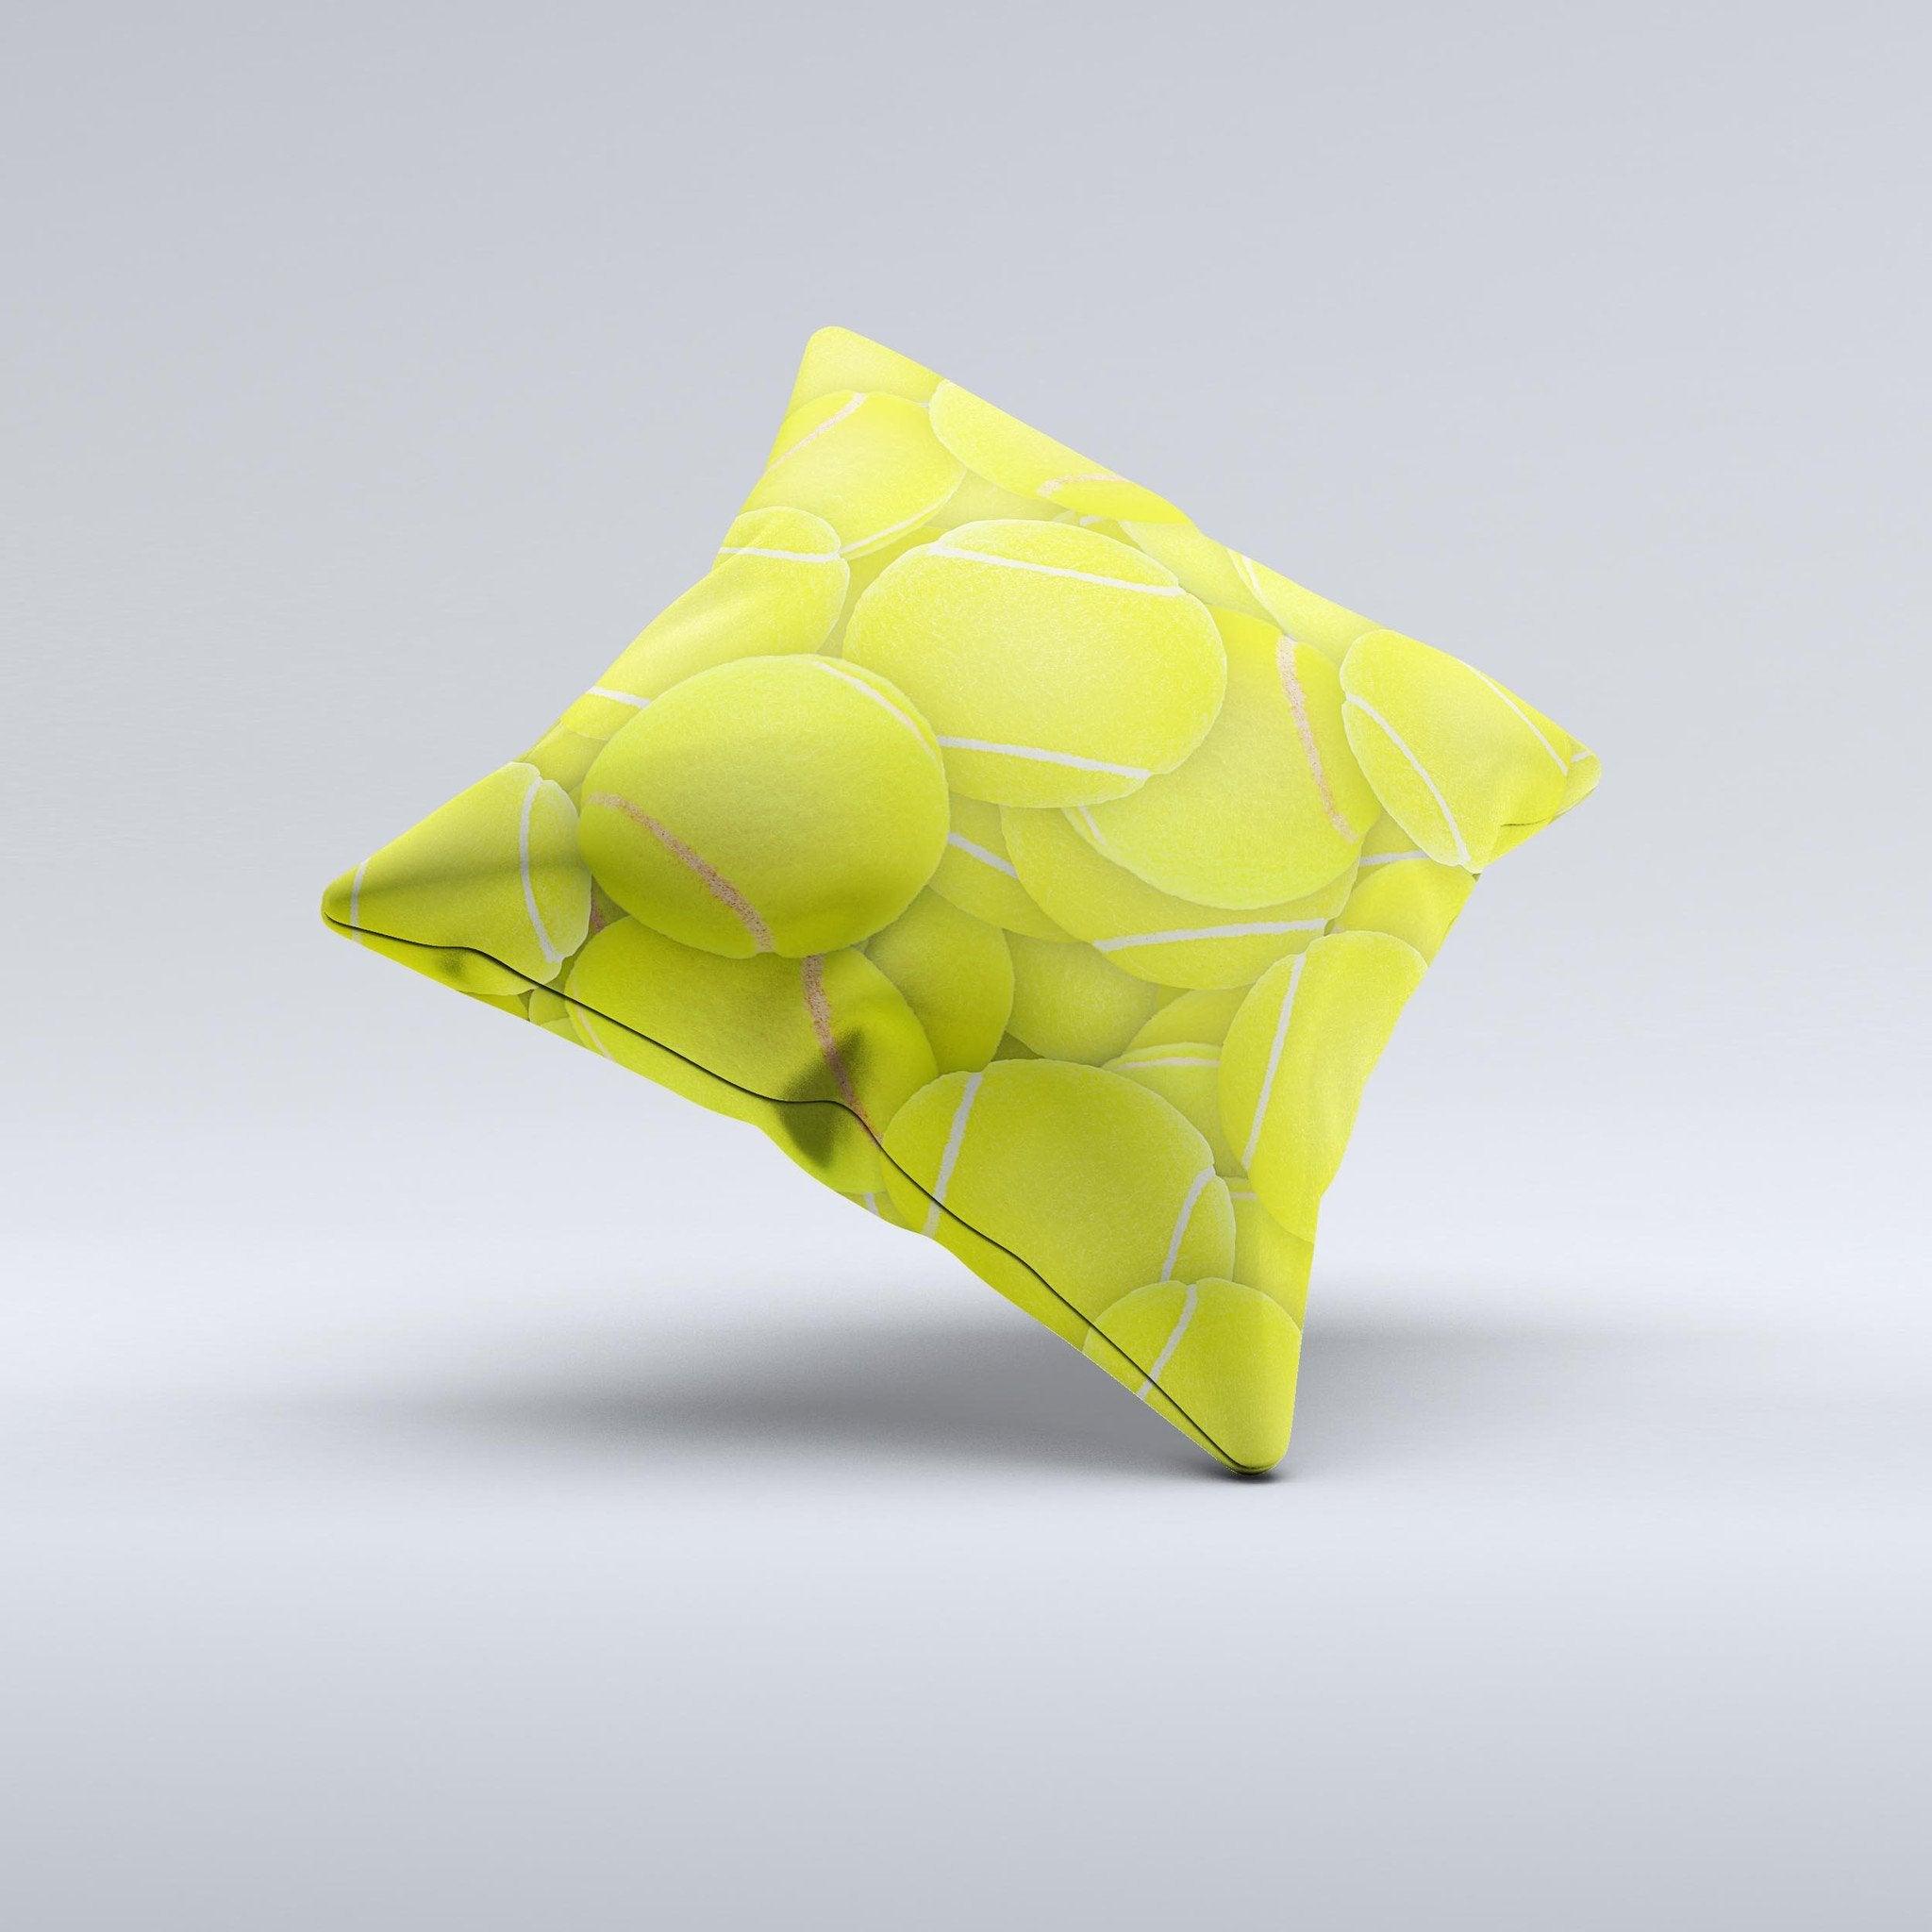 Tennis Ball Overlay Ink-Fuzed Decorative Throw Pillow - VirtuousWares:Global